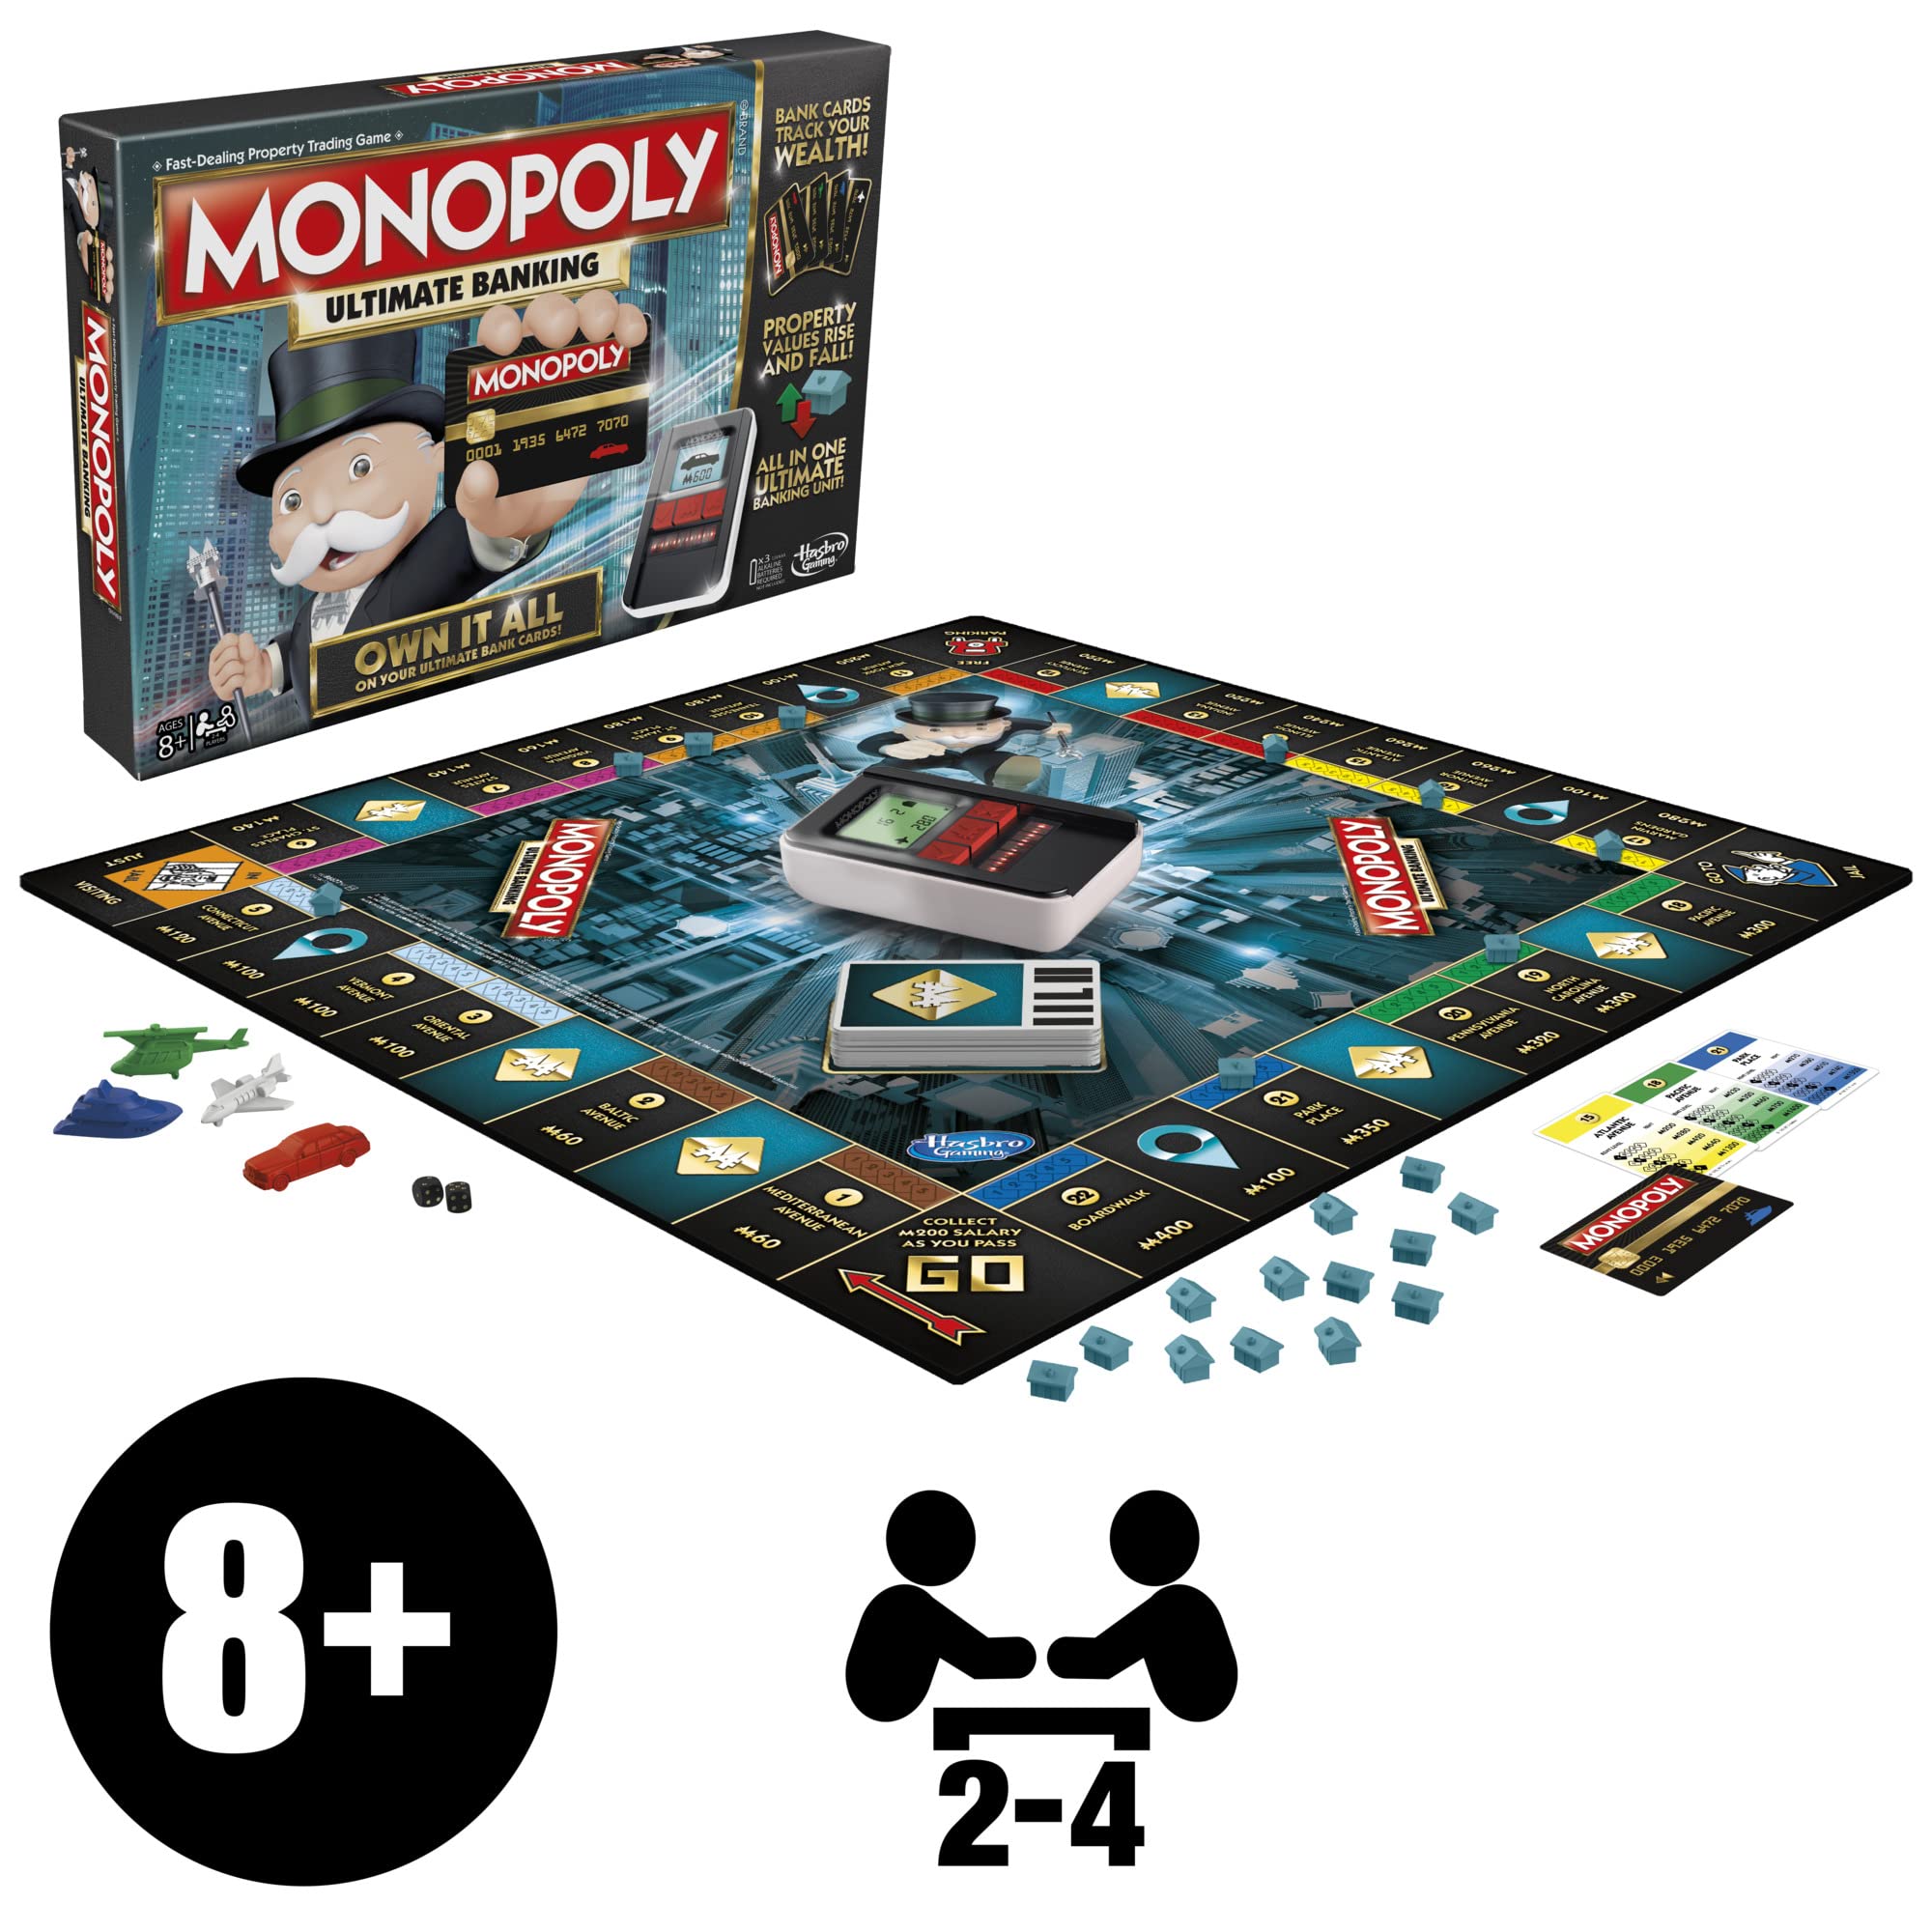 Monopoly Ultimate Banking Edition Board Game for Families and Kids Ages 8 and Up, Electronic Banking Unit (Amazon Exclusive)